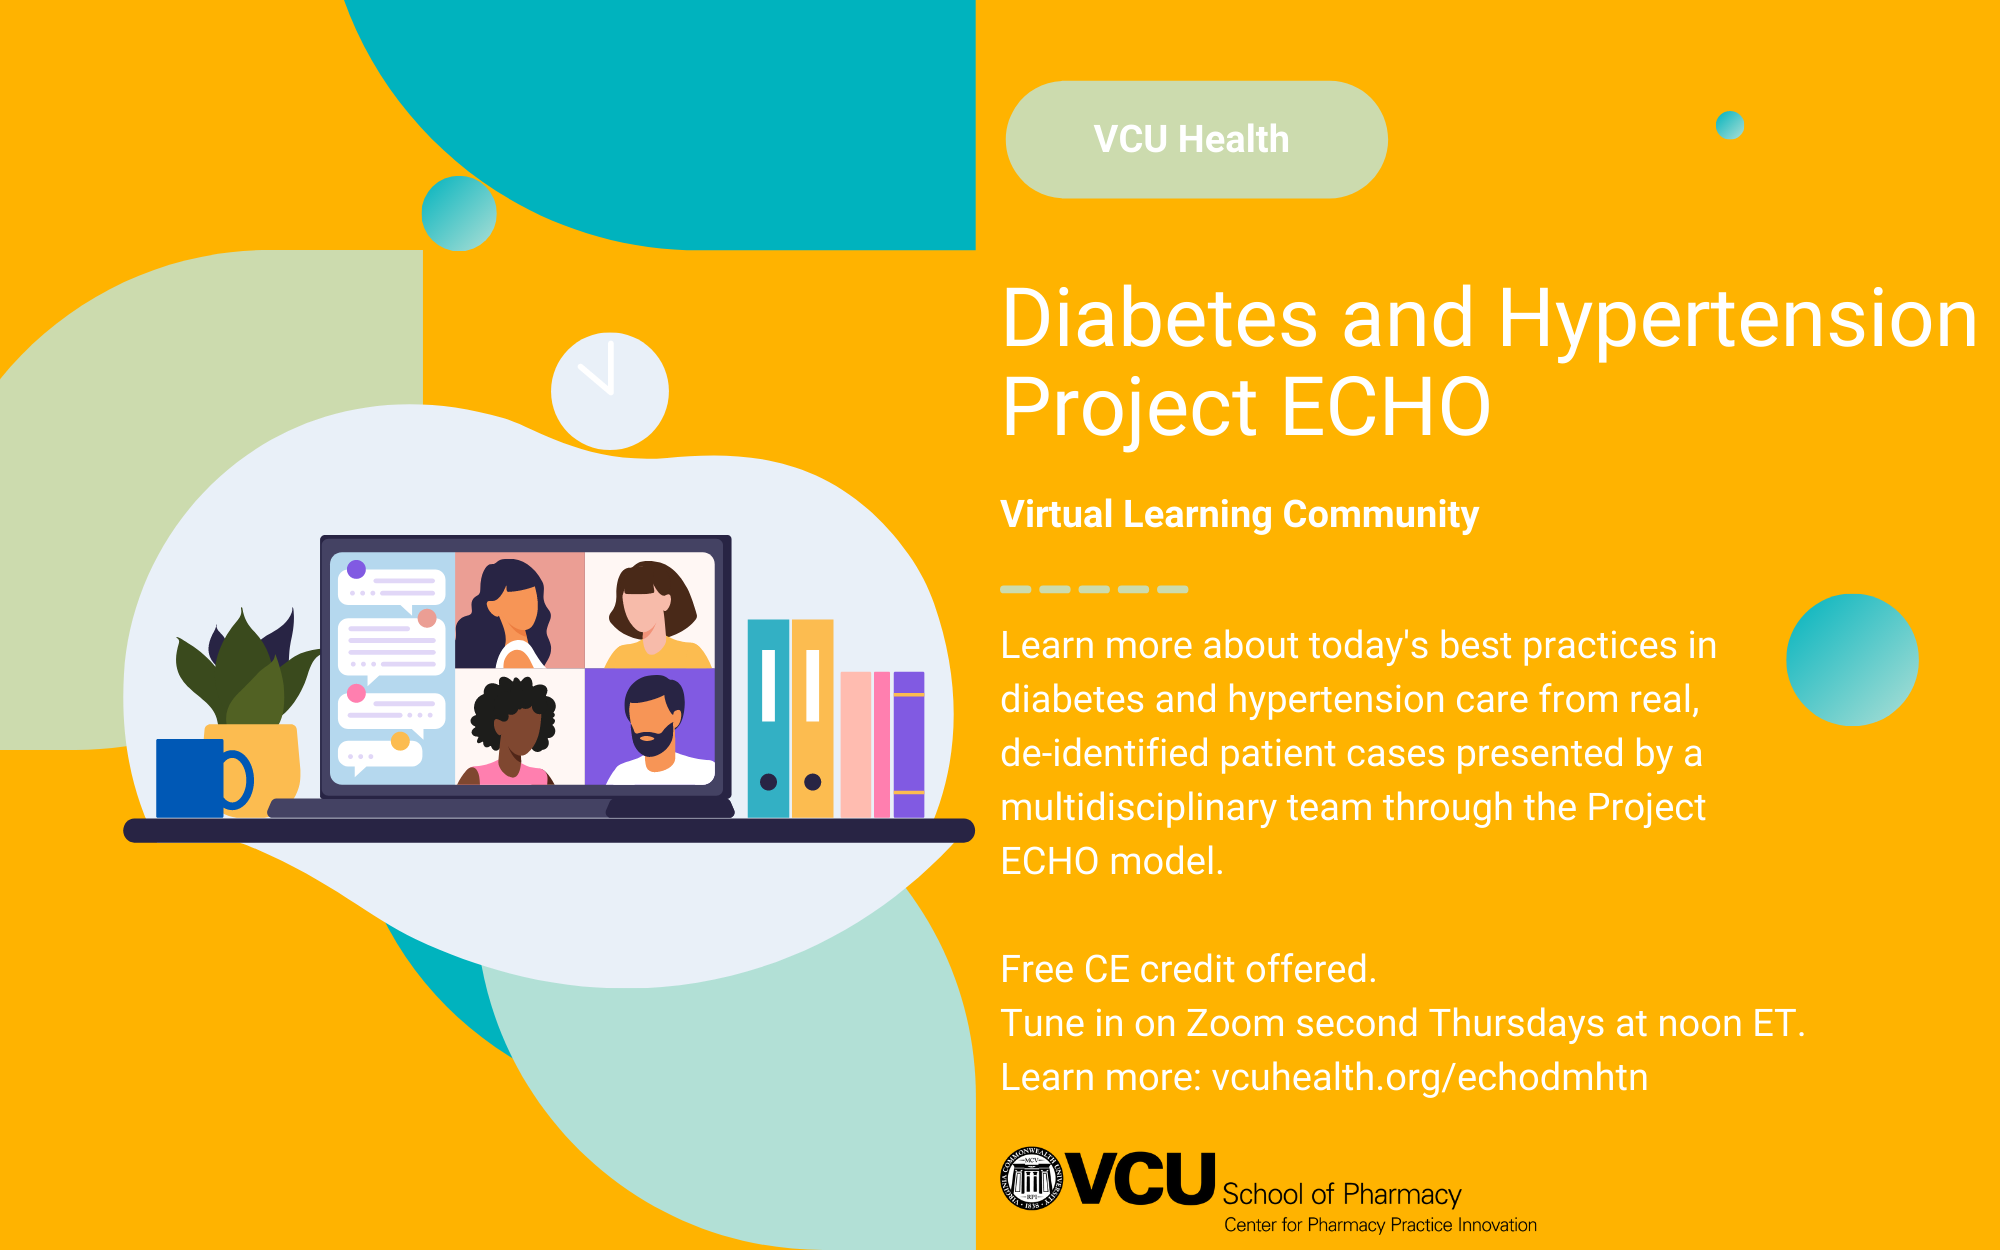 VCU Health: Diabetes and hypertension Project ECHO. Virtual Learning Community.  Learn more about today's best practices in diabetes and hypertension care from real,  de-identified patient cases presented by a multidisciplinary team through the Project ECHO model.  Free CE credit offered. Tune in on Zoom second Thursdays at noon ET. Learn more: vcuhealth.org/echodmhtn